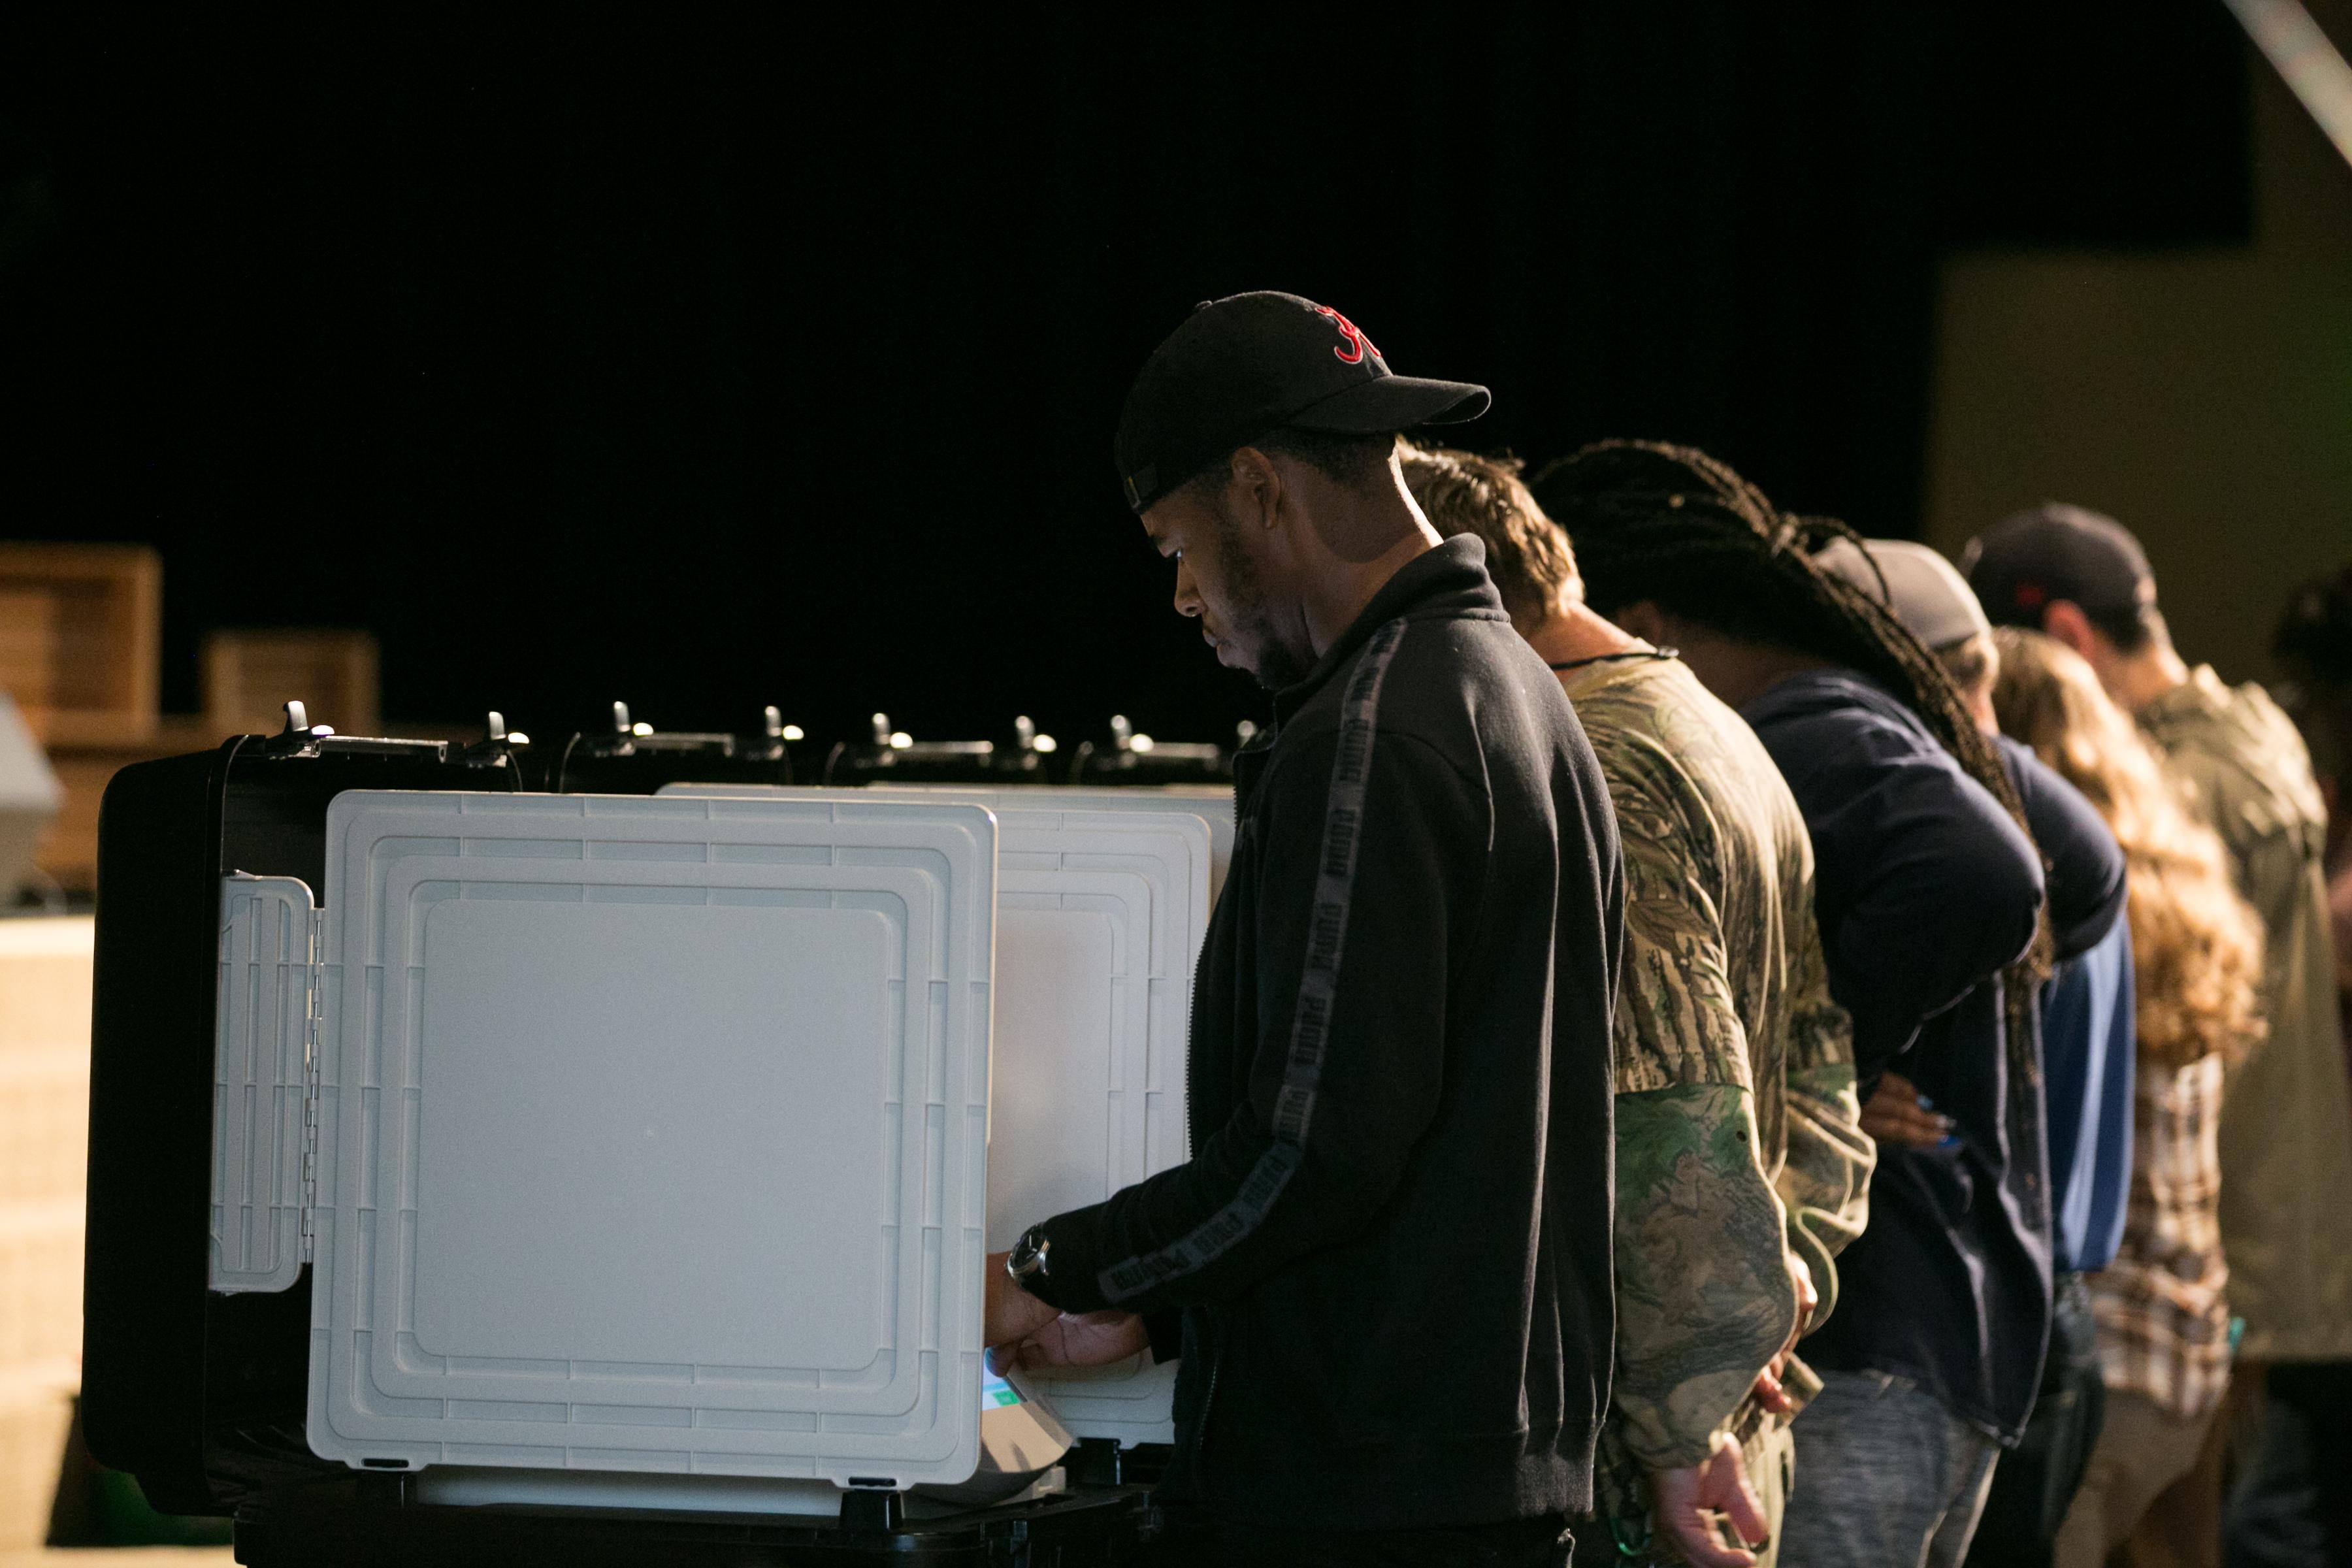 Voters cast their ballots in a polling place.